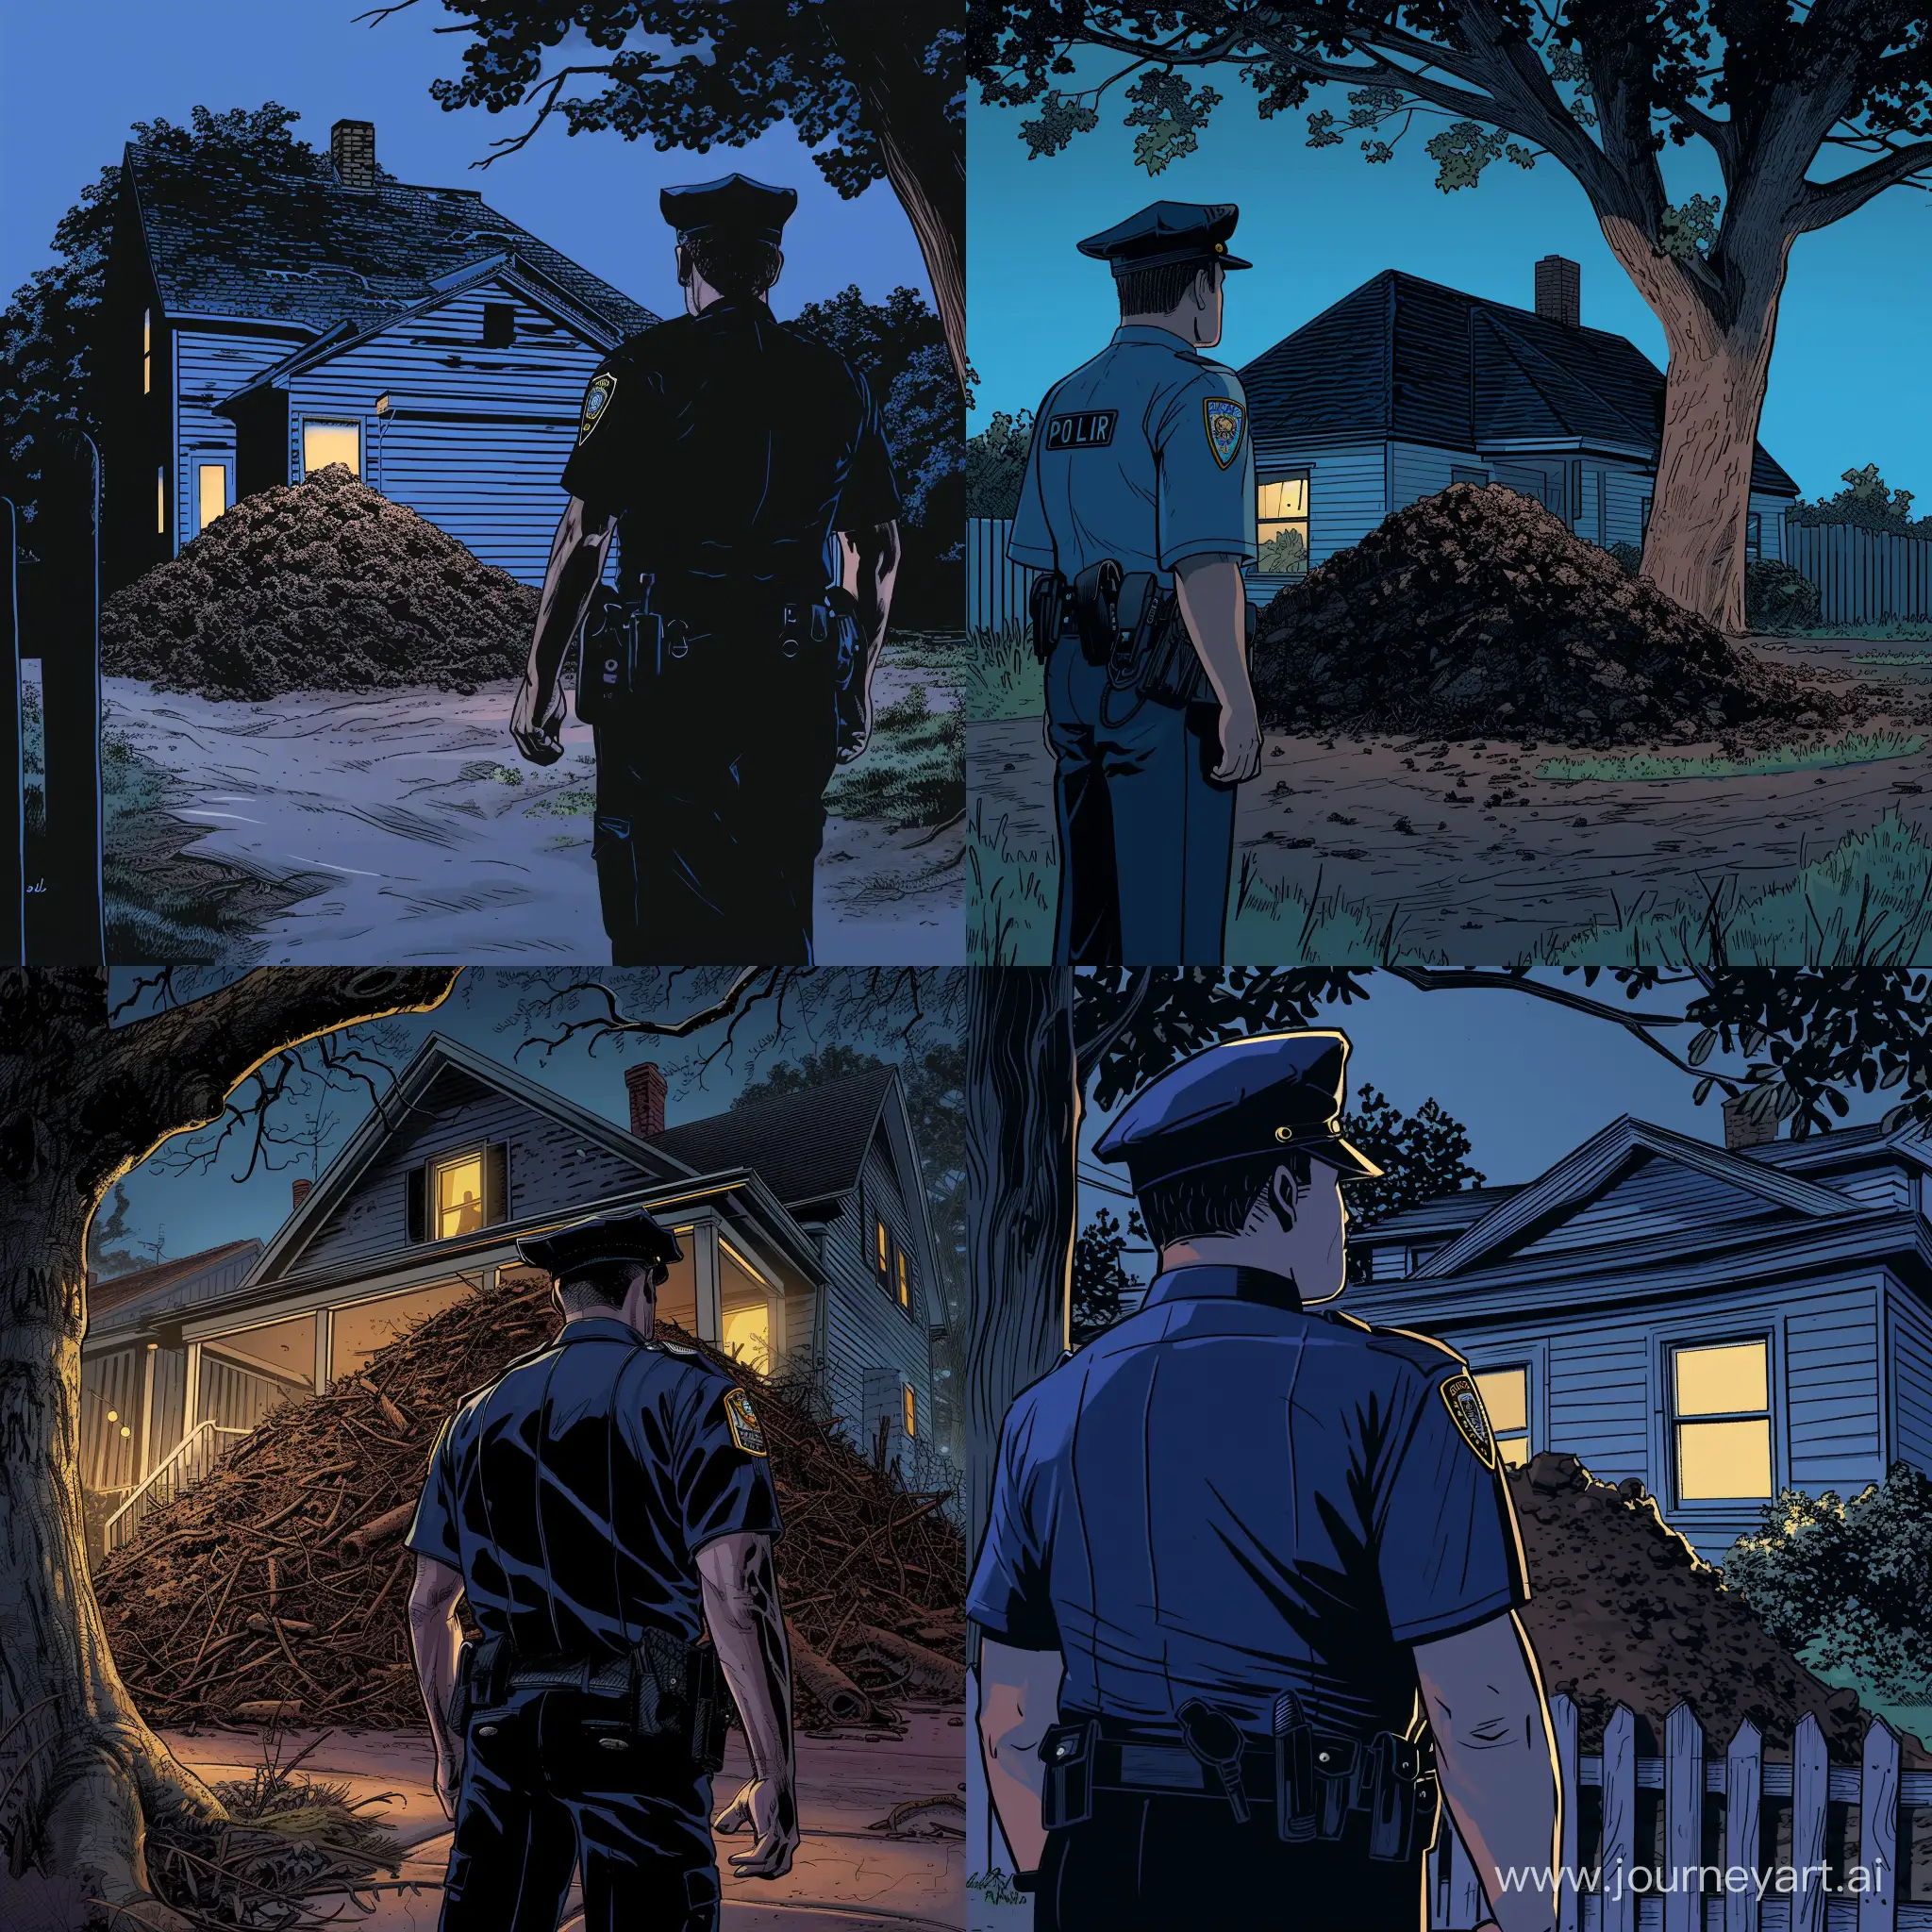 policemen notices a strange pile of dirt behind the house, little lighting, modern american comic book style.